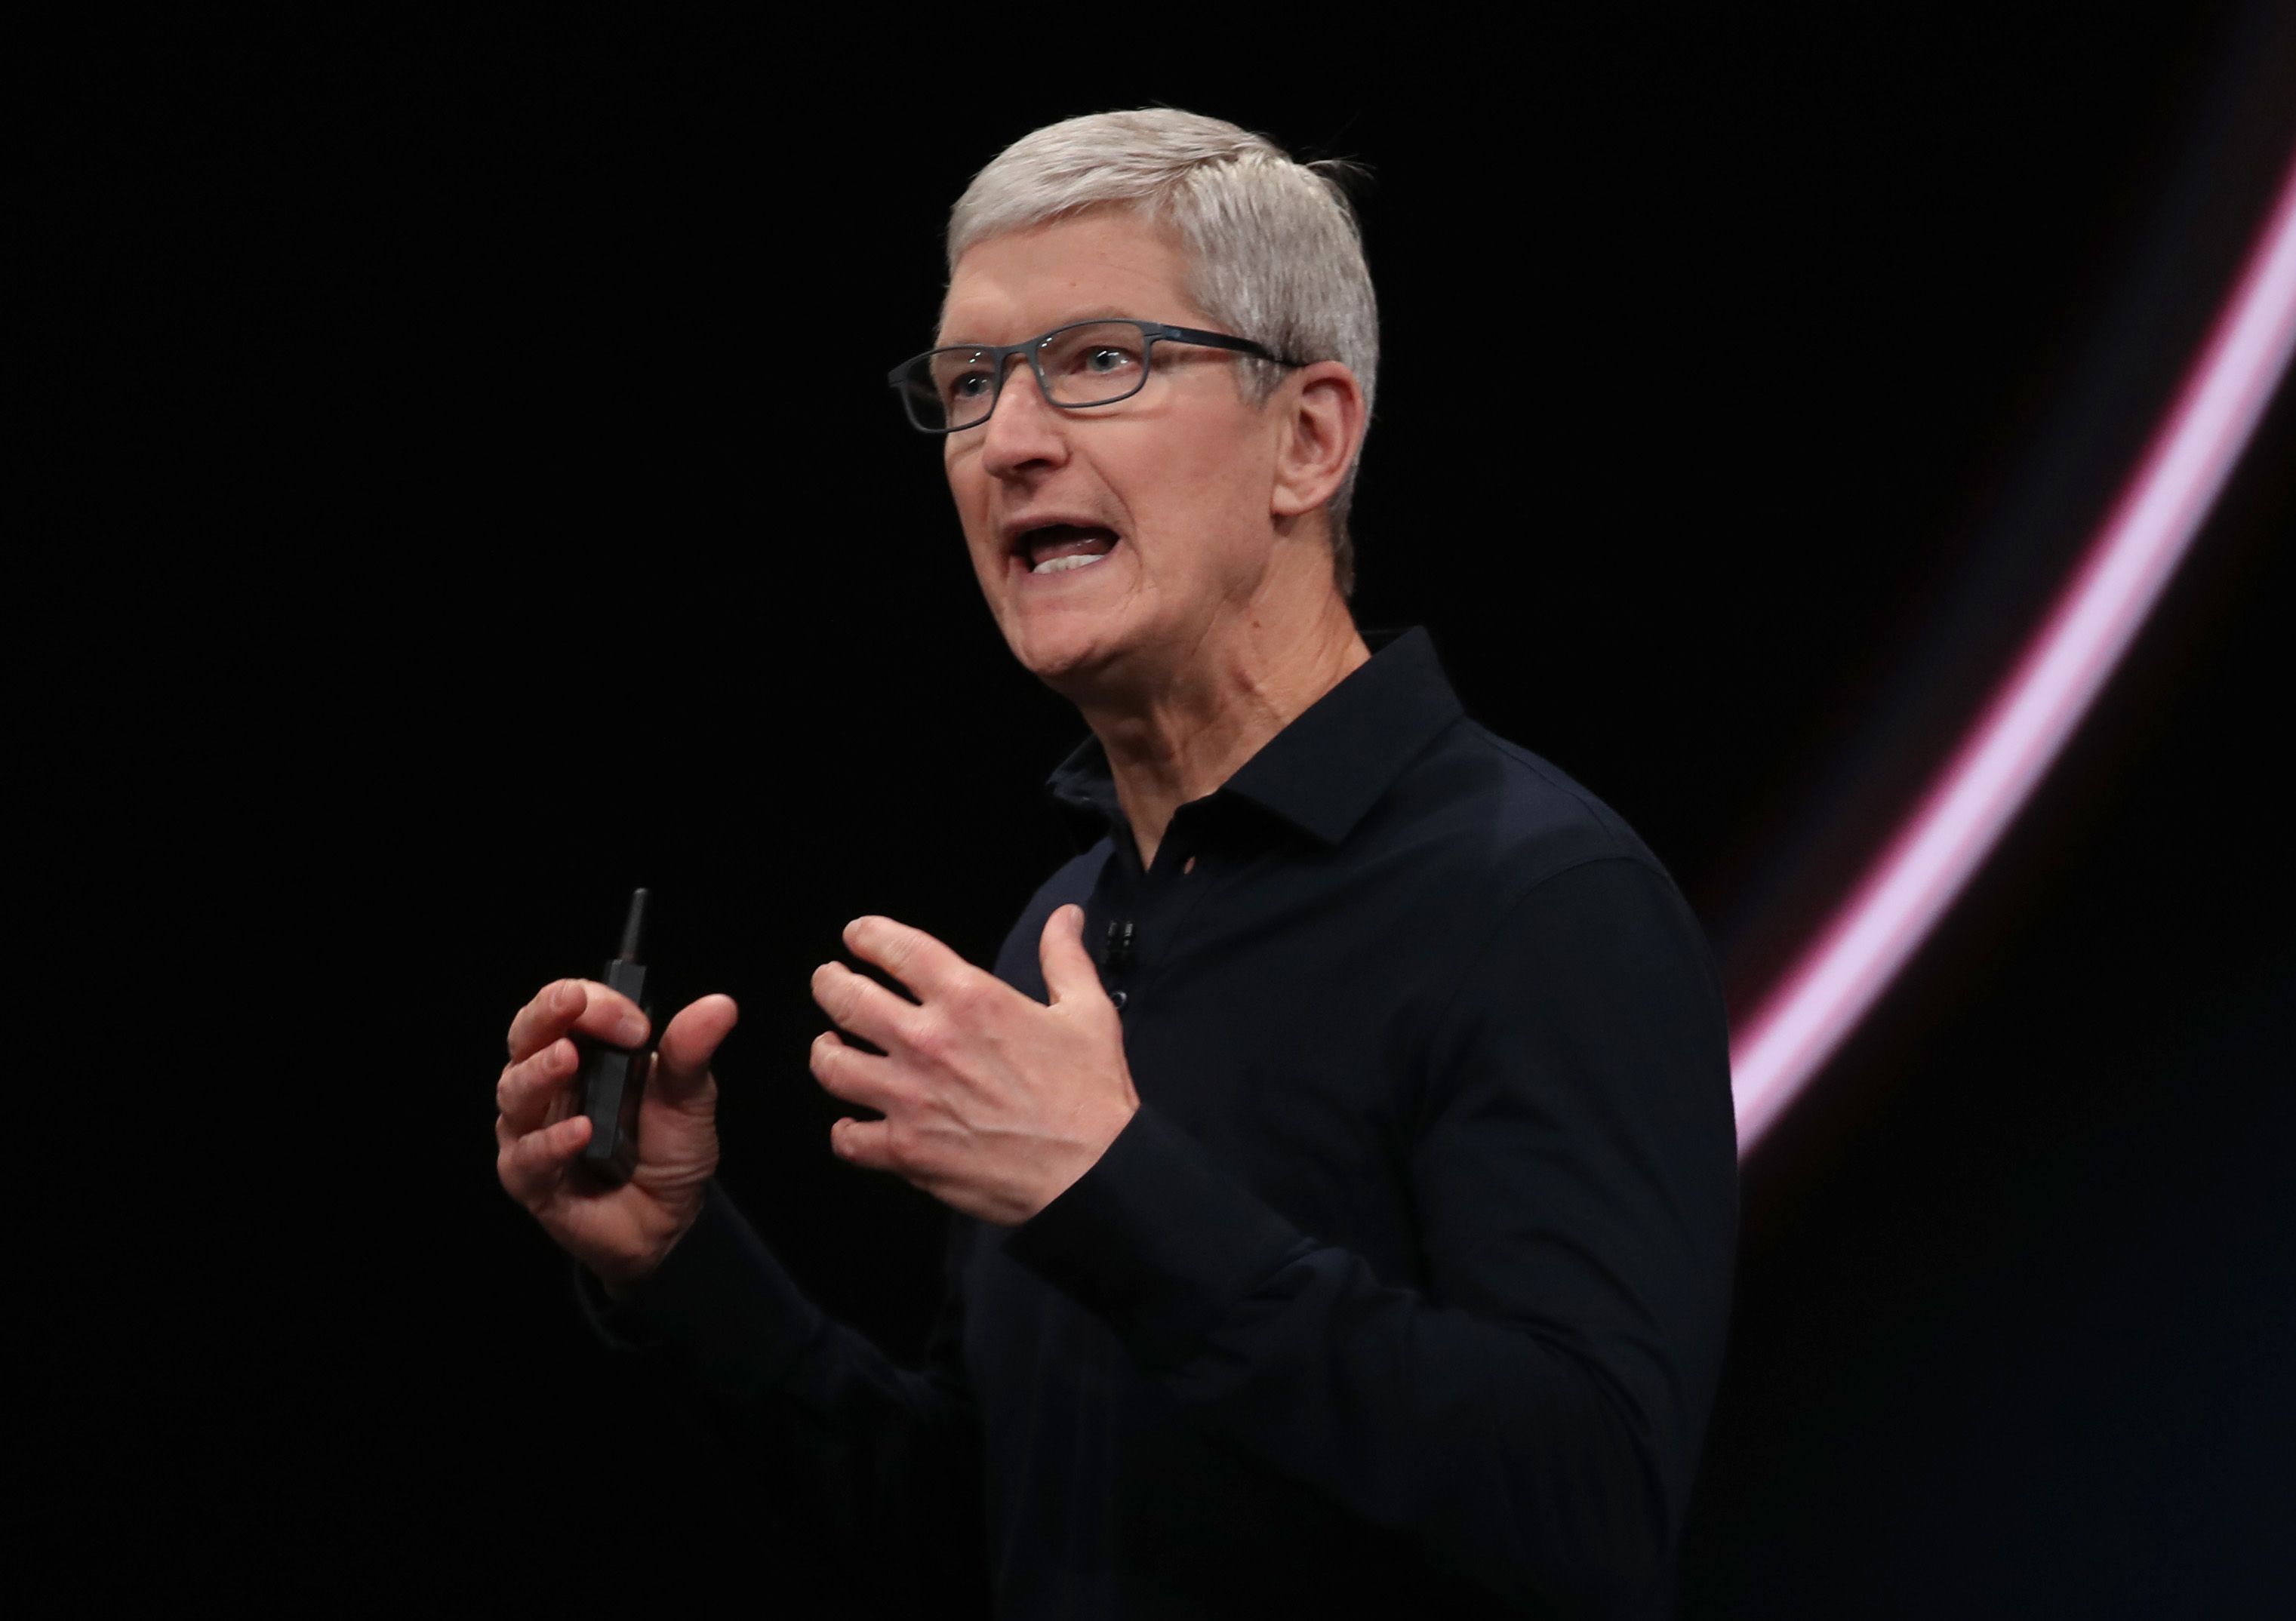 Cook says Apple is not a monopoly as government begins antitrust probe